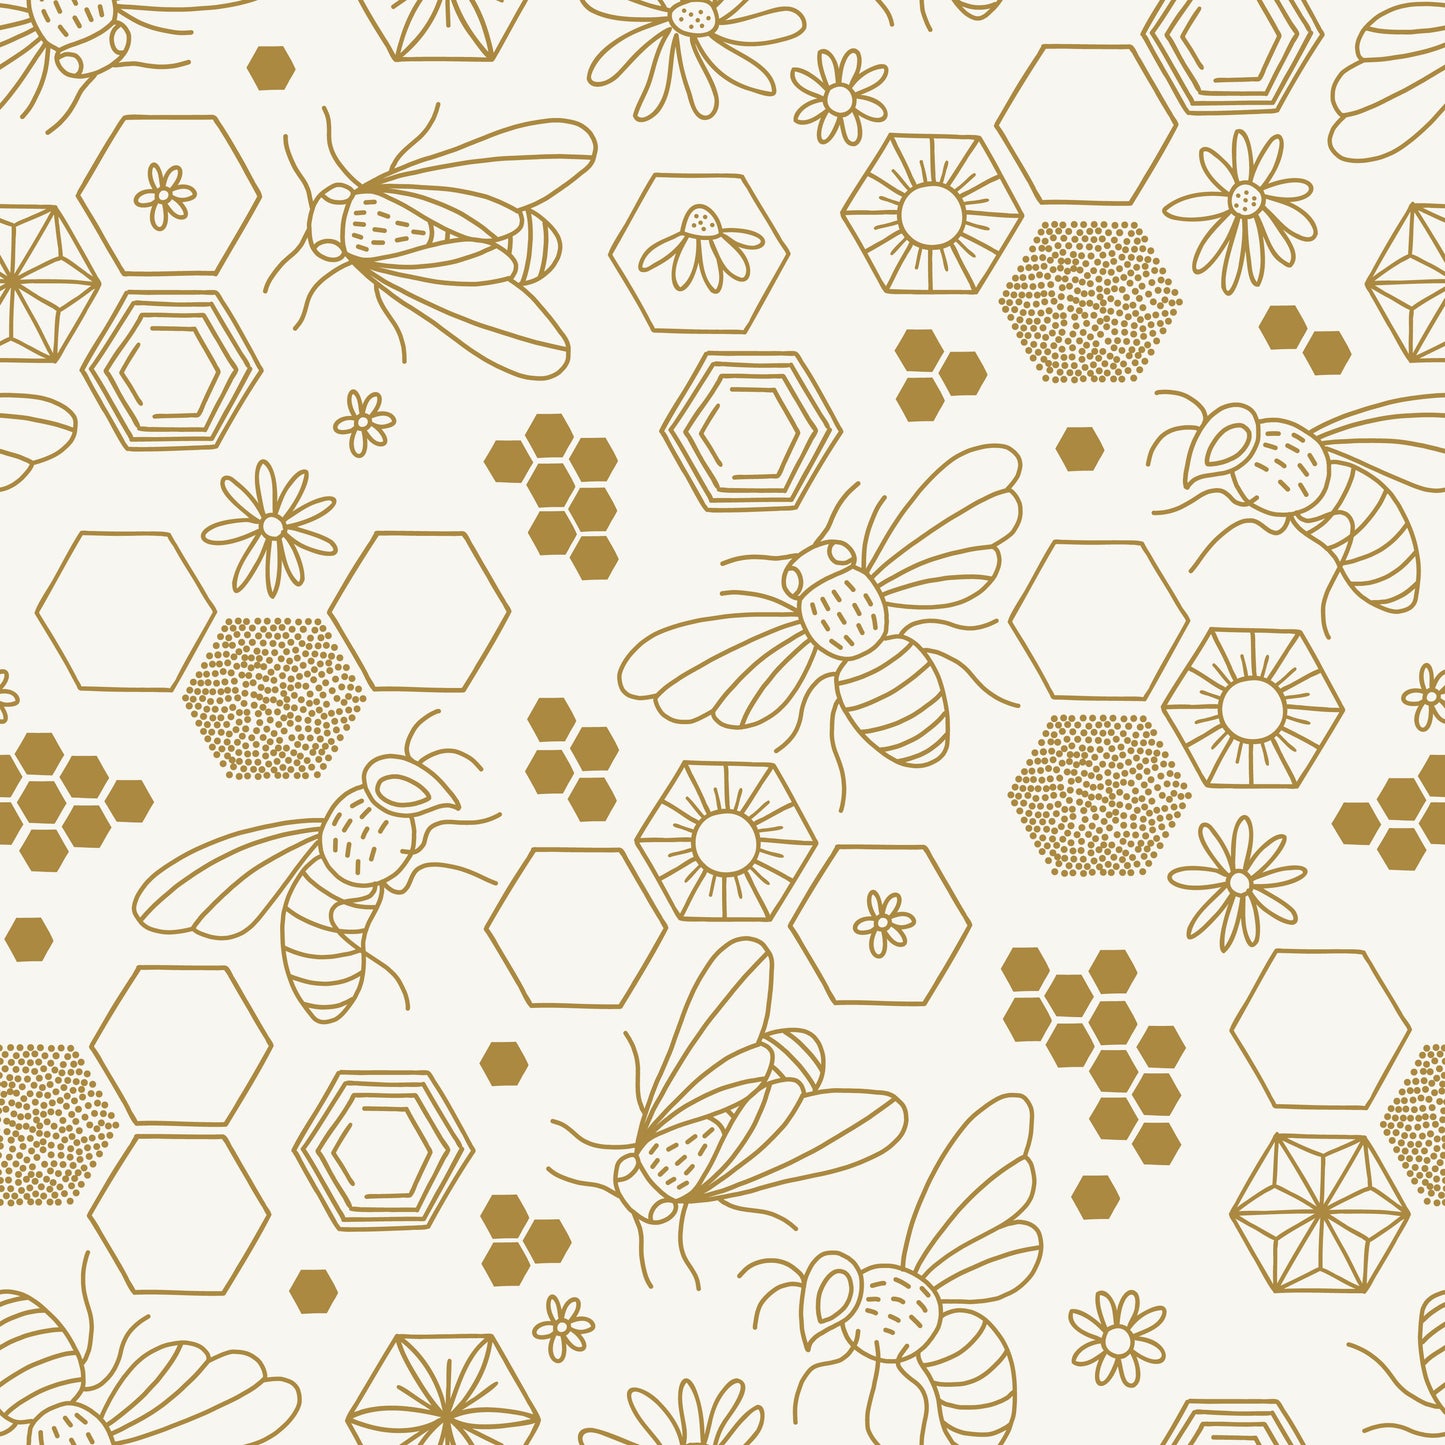 Cute honey bee and honeycomb geometric gold/yellow pattern on white background easy to install and remove peel and stick custom wallpaper available in different lengths/sizes locally created and printed in Canada Artichoke wallpaper. Washable, durable, commercial grade, removable and waterproof.